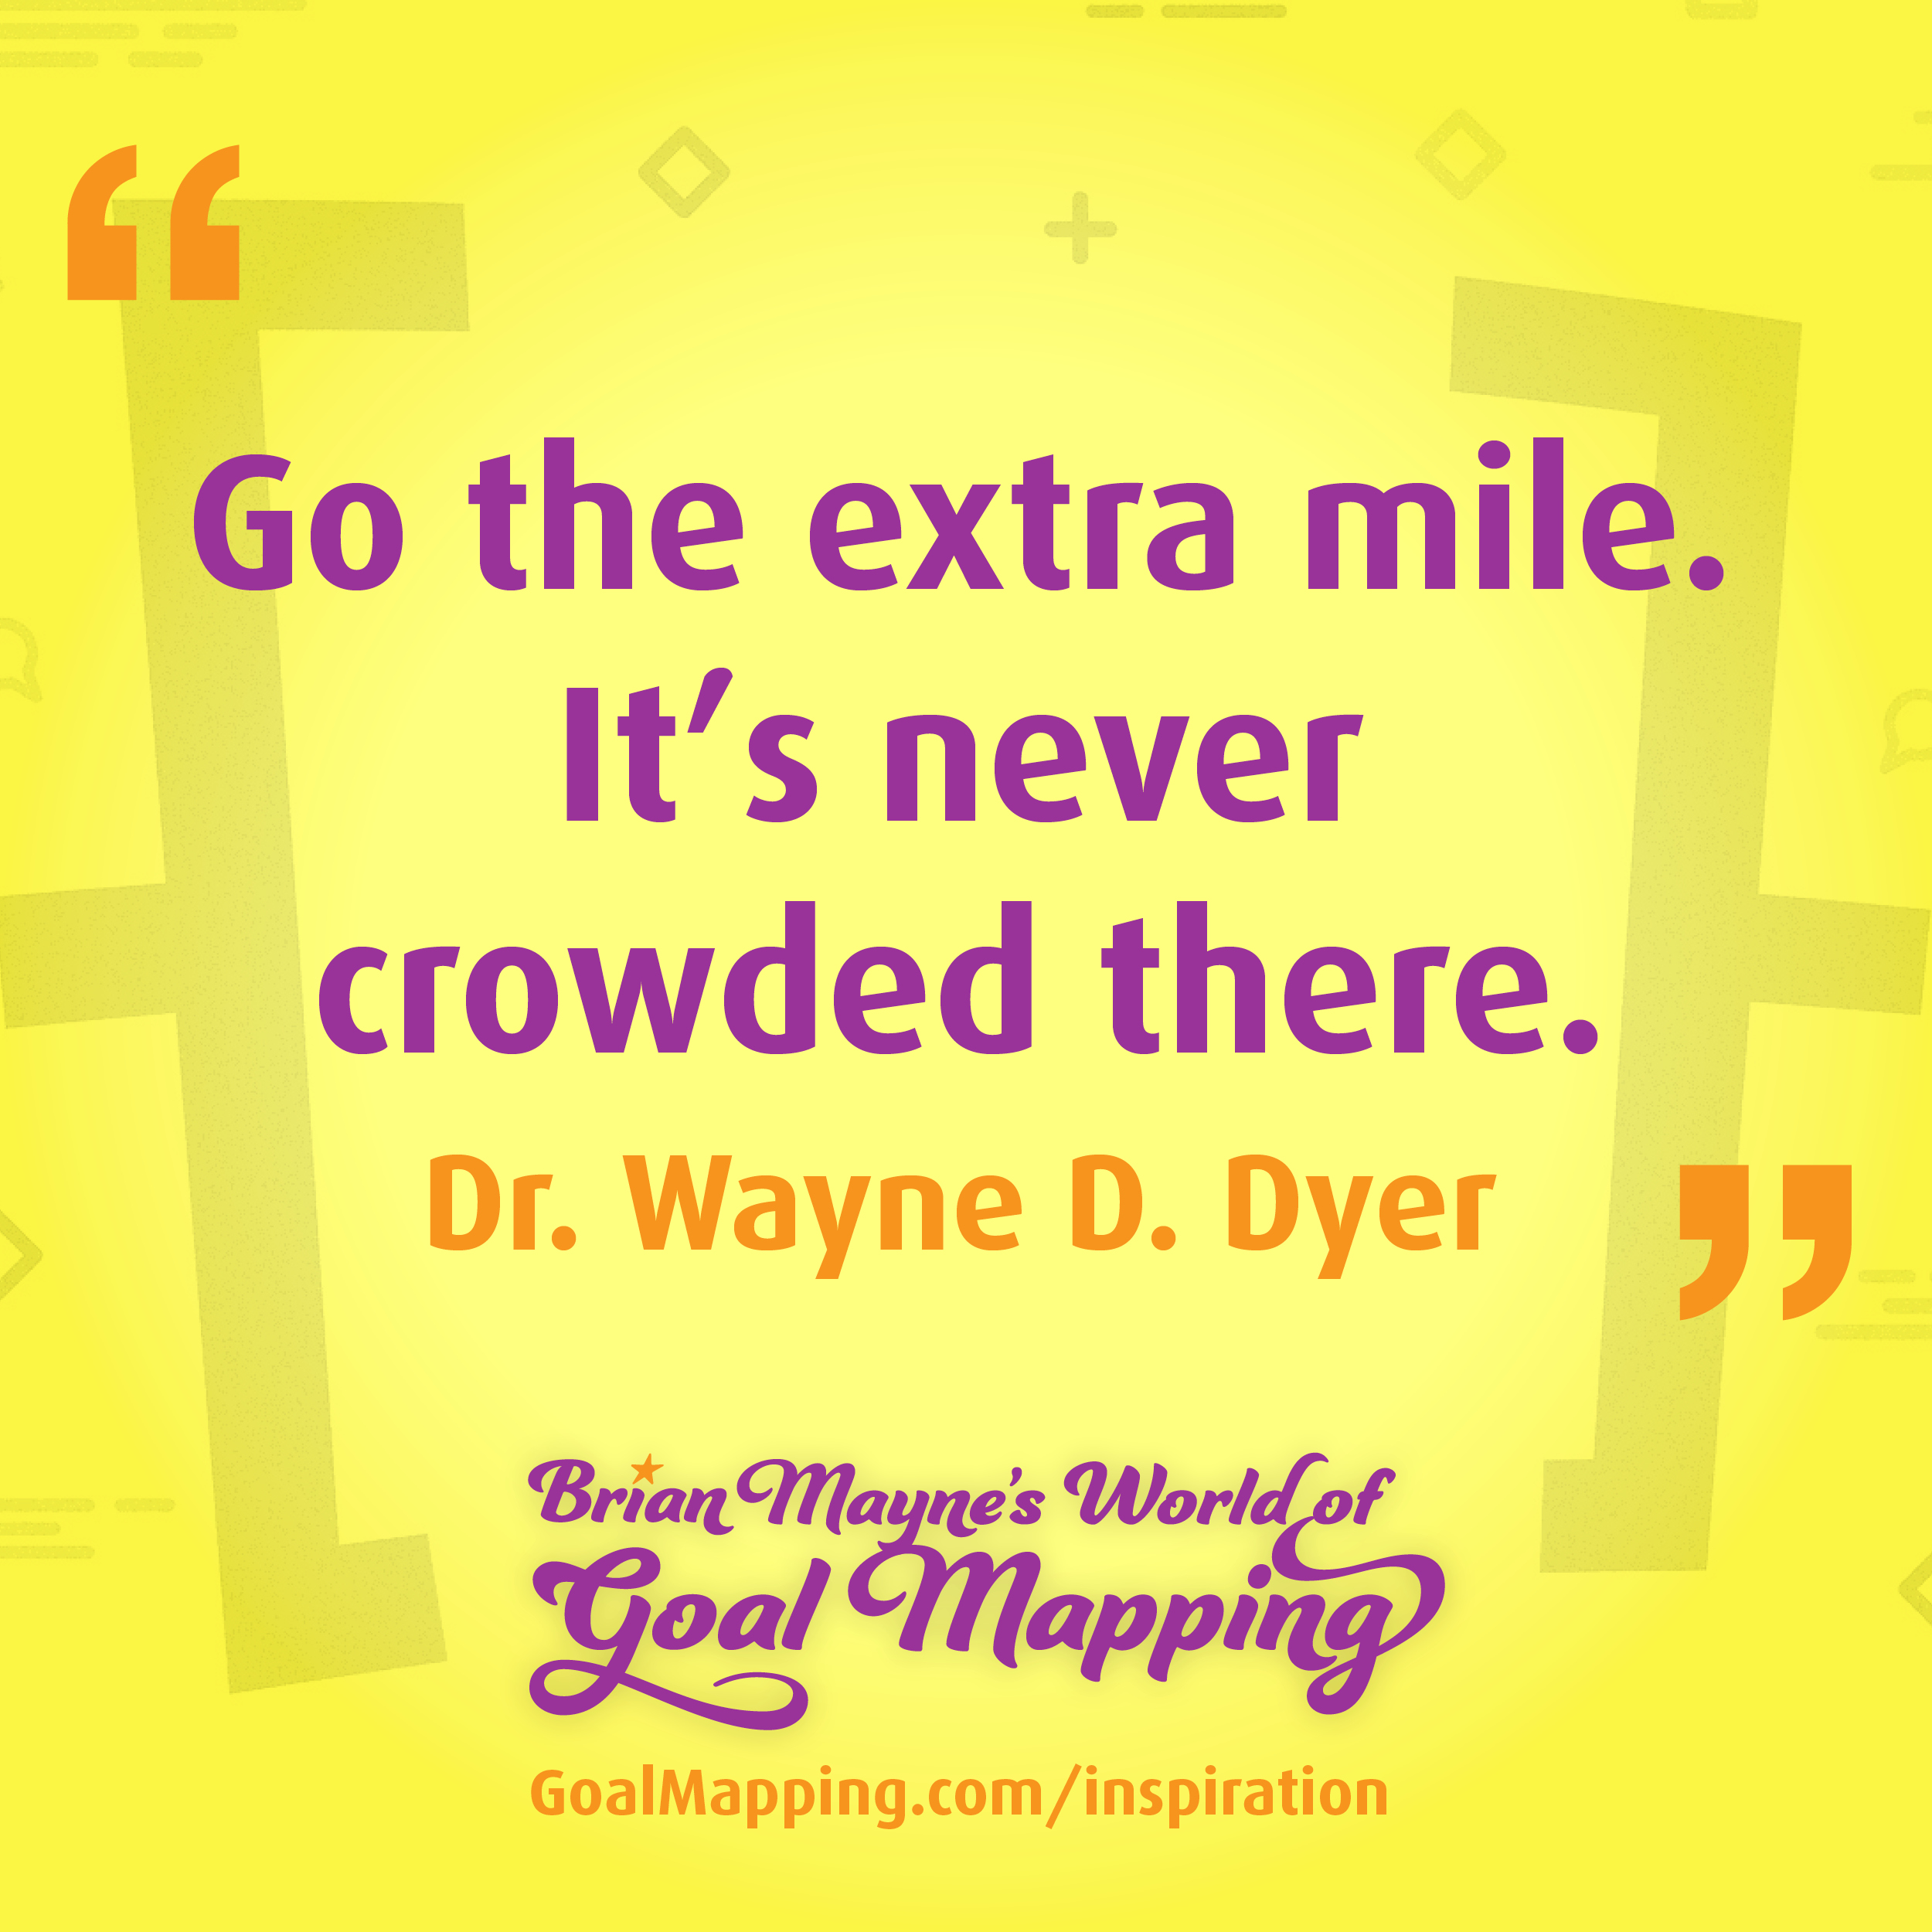 "Go the extra mile. It’s never crowded there." Dr. Wayne D. Dyer